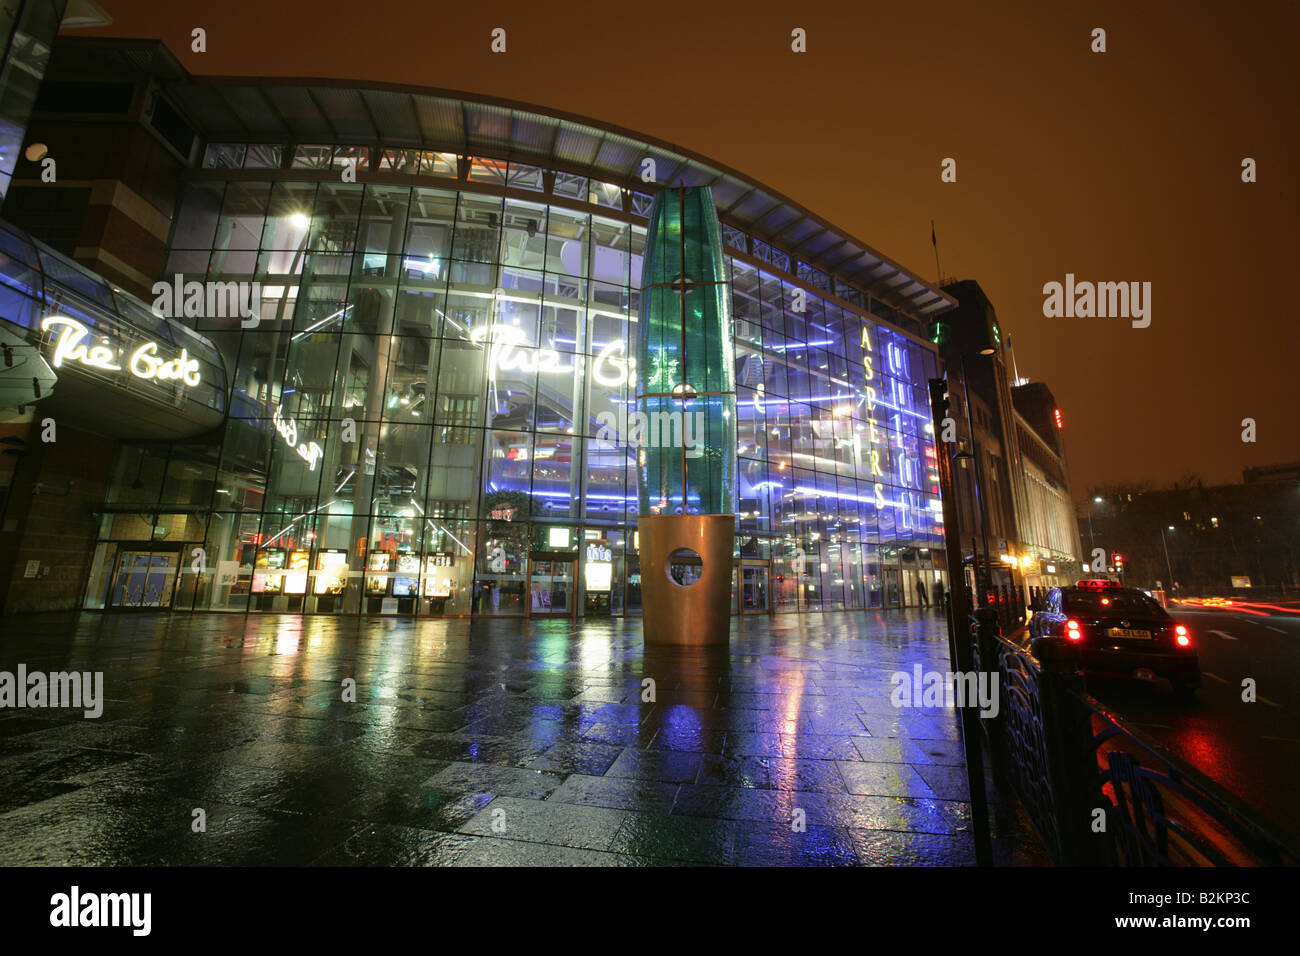 City of Newcastle, England. A rainy night view of The Gate leisure, retail and entertainment complex on Newgate Street. Stock Photo